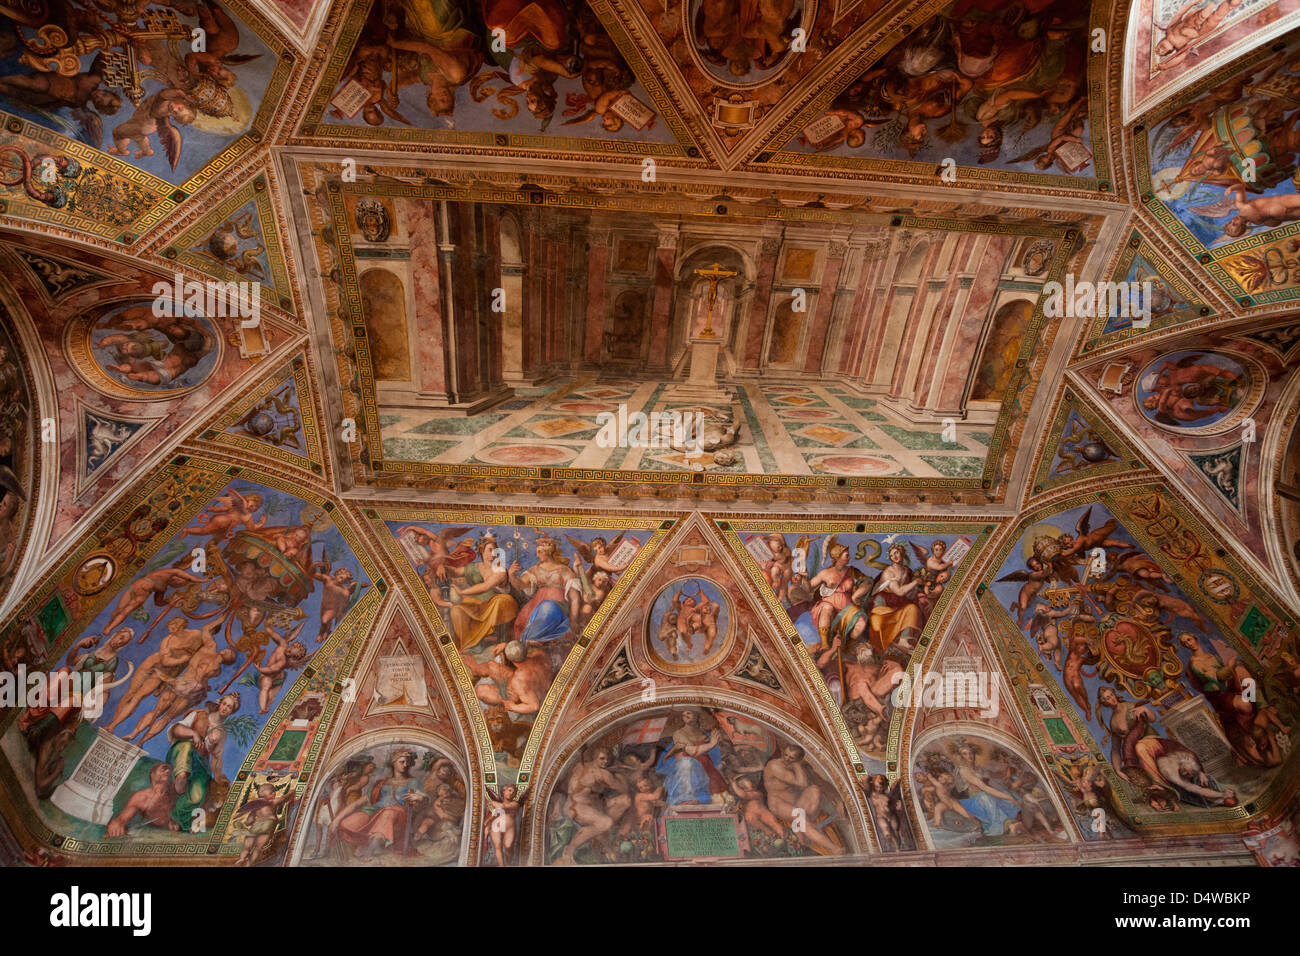 Triumph of Christian religion on the ceiling of the Room of Constantine in Vatican Museums, Rome, Italy Stock Photo